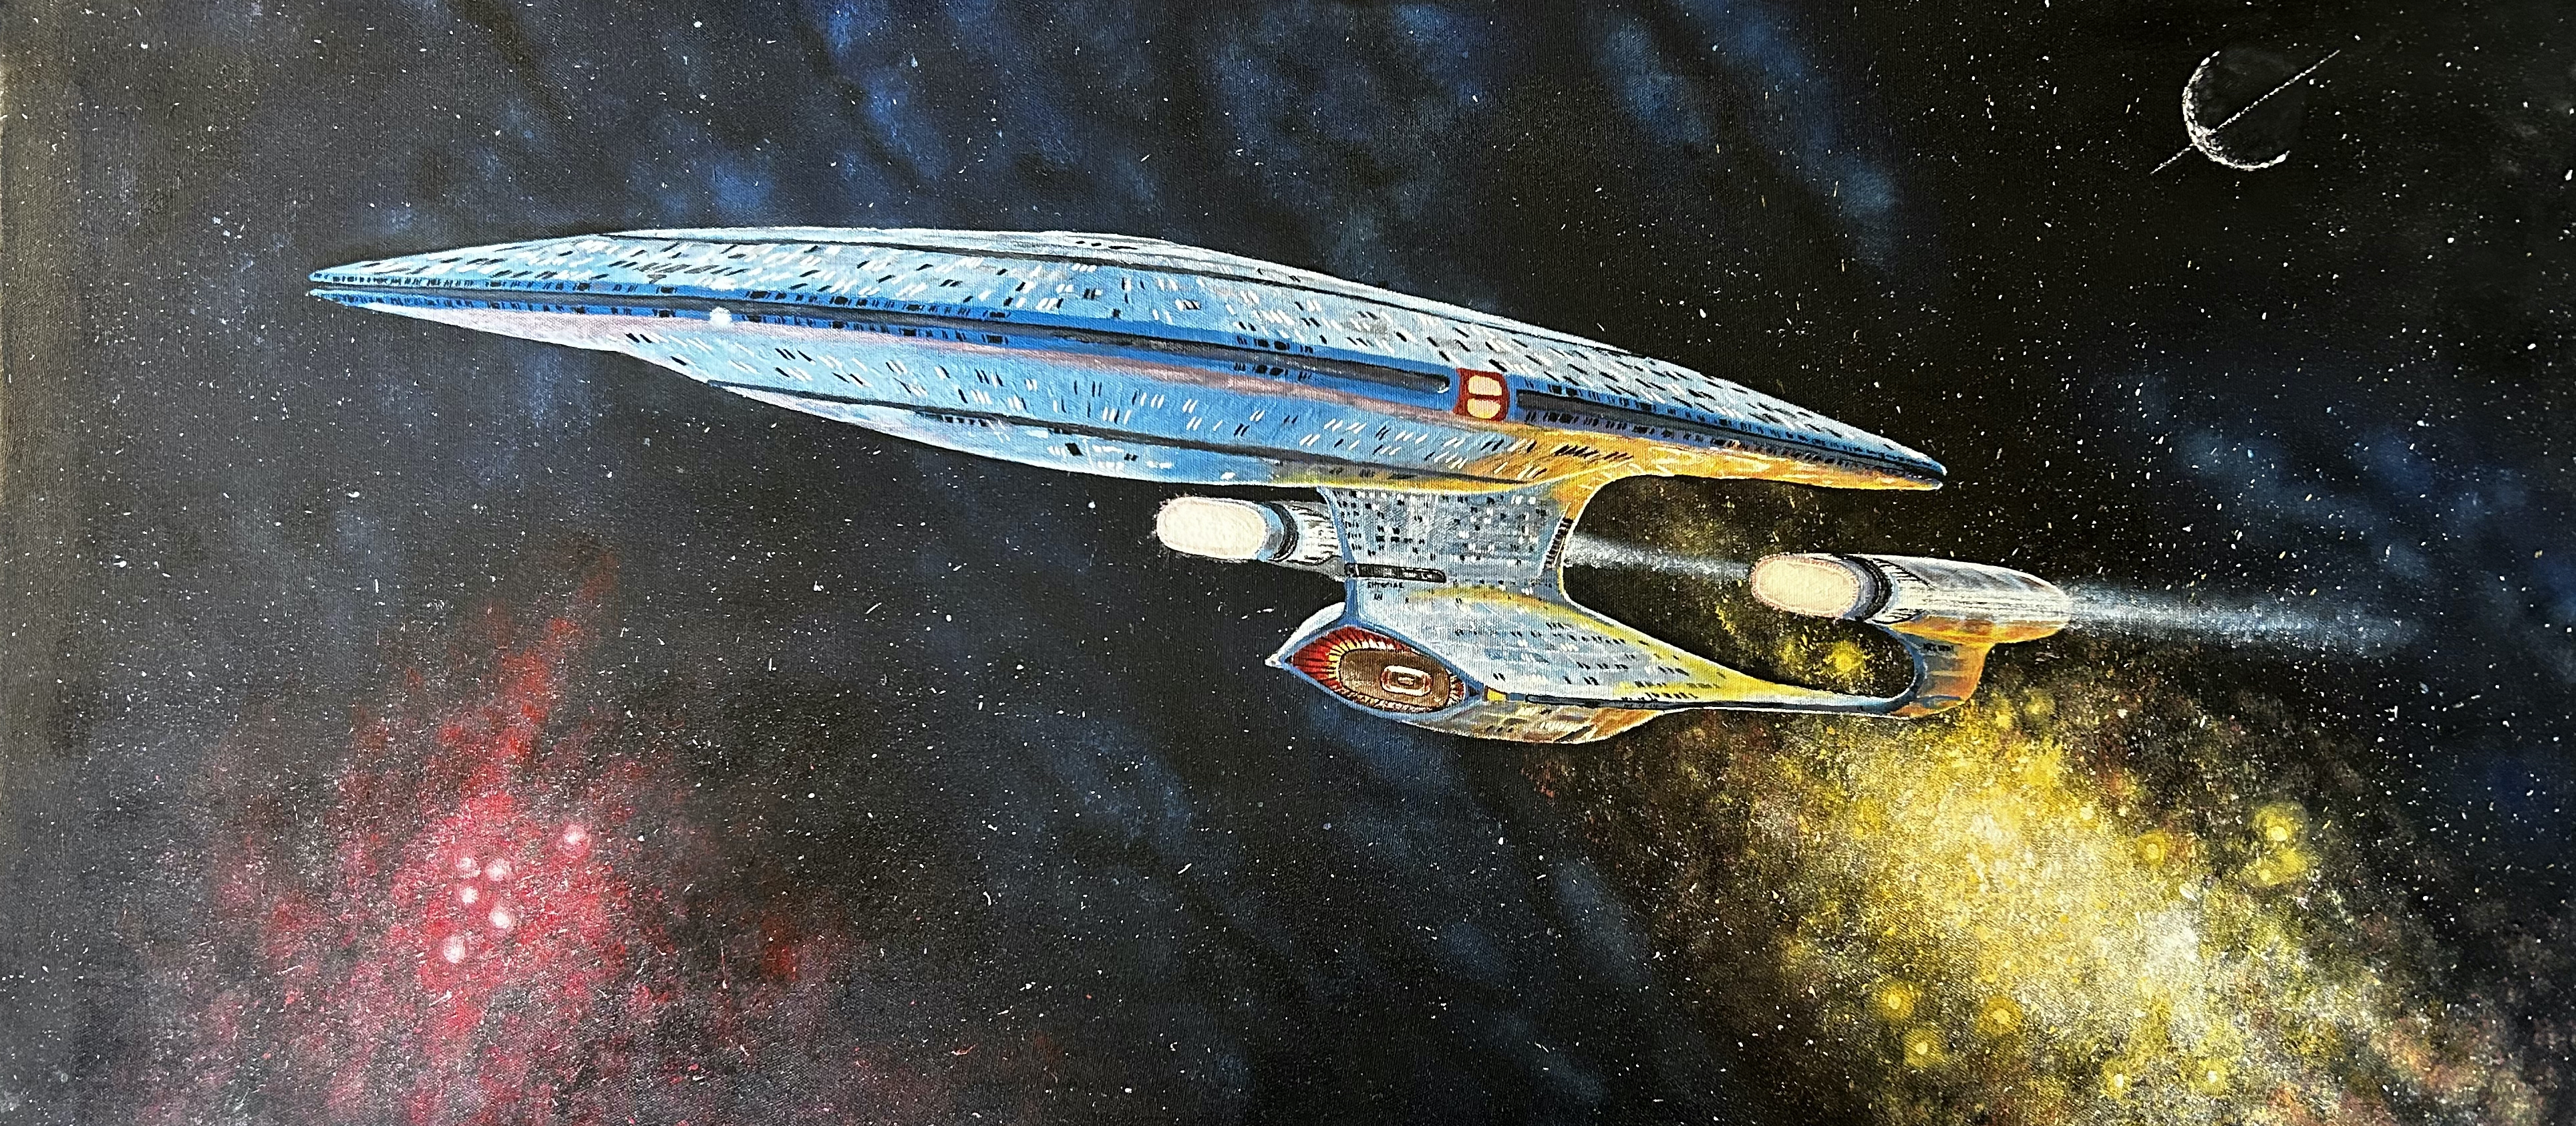 Final Enterprise Painting with Frame.jpg